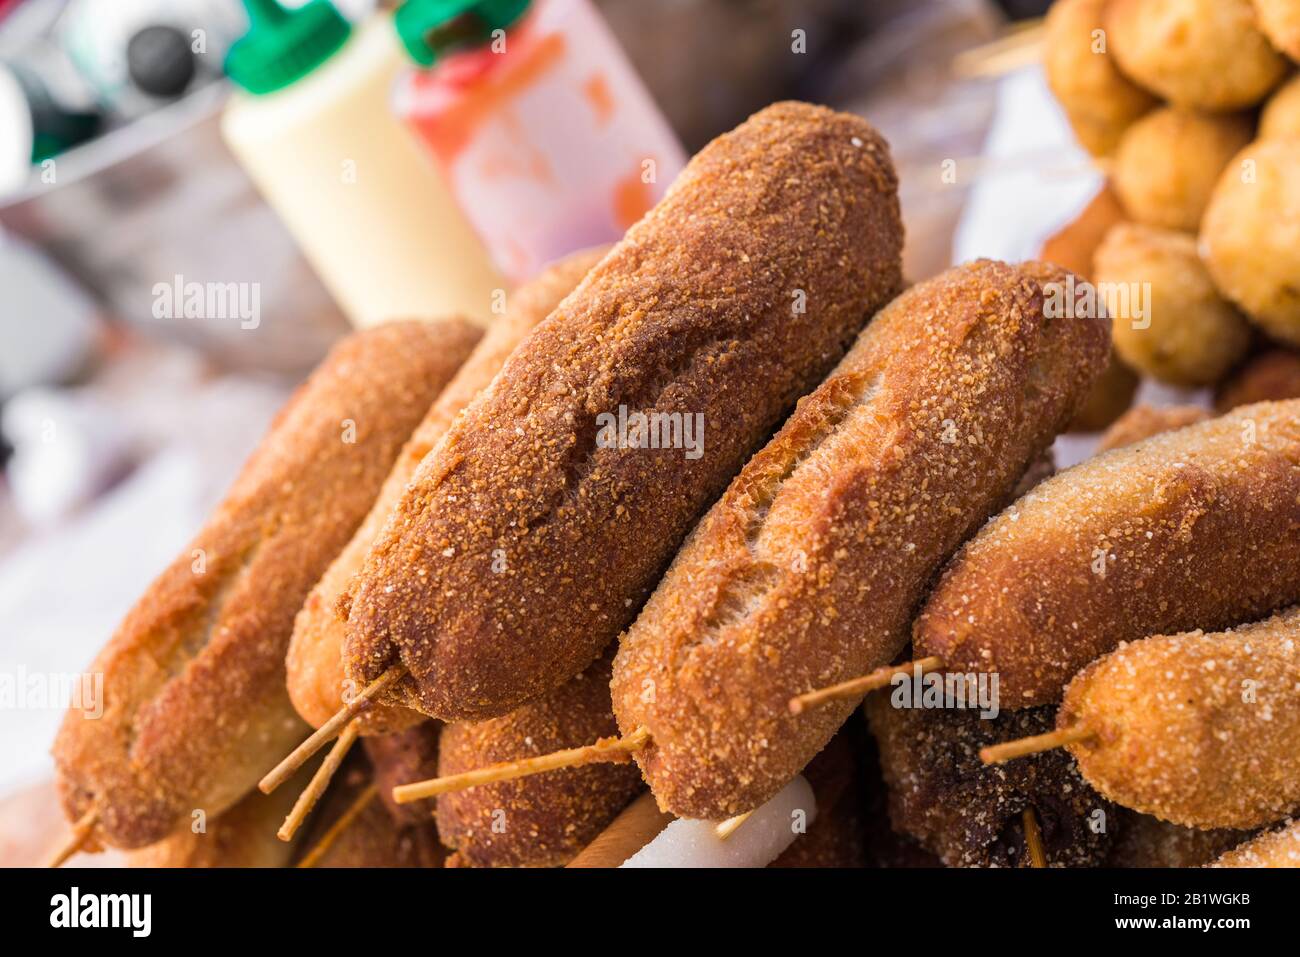 Traditional South Korean corn dogs at a street food market. Stock Photo